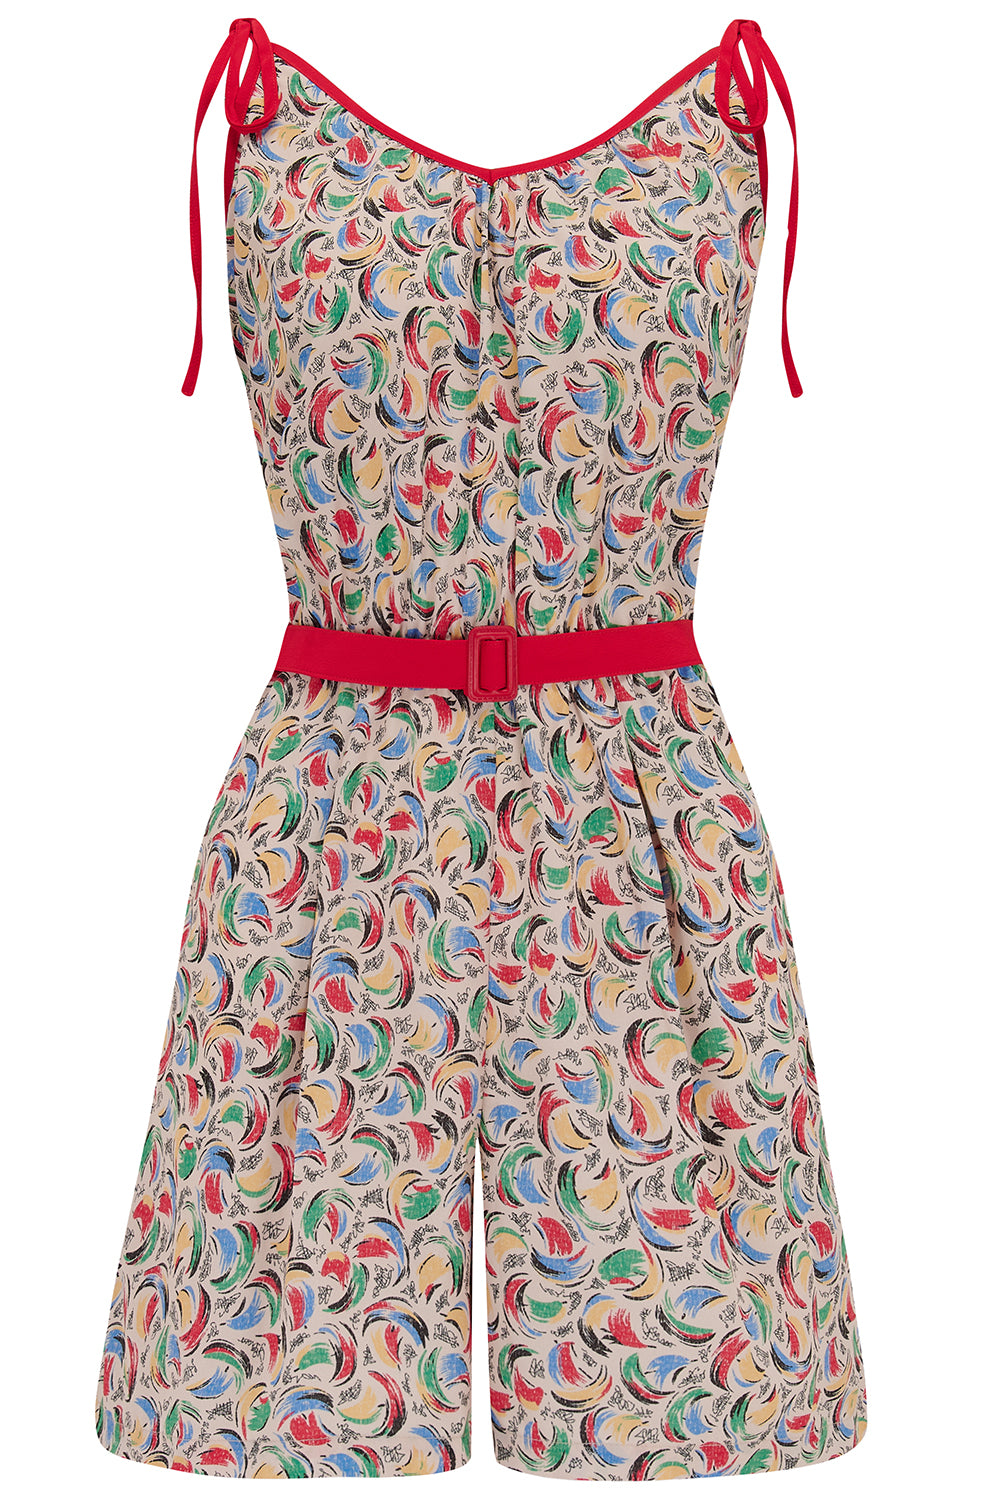 The "Marcie" Beach Playsuit / Romper in Tutti Frutti print With Red Contrasts, True & Authentic 1950s Vintage Style - True and authentic vintage style clothing, inspired by the Classic styles of CC41 , WW2 and the fun 1950s RocknRoll era, for everyday wear plus events like Goodwood Revival, Twinwood Festival and Viva Las Vegas Rockabilly Weekend Rock n Romance Rock n Romance